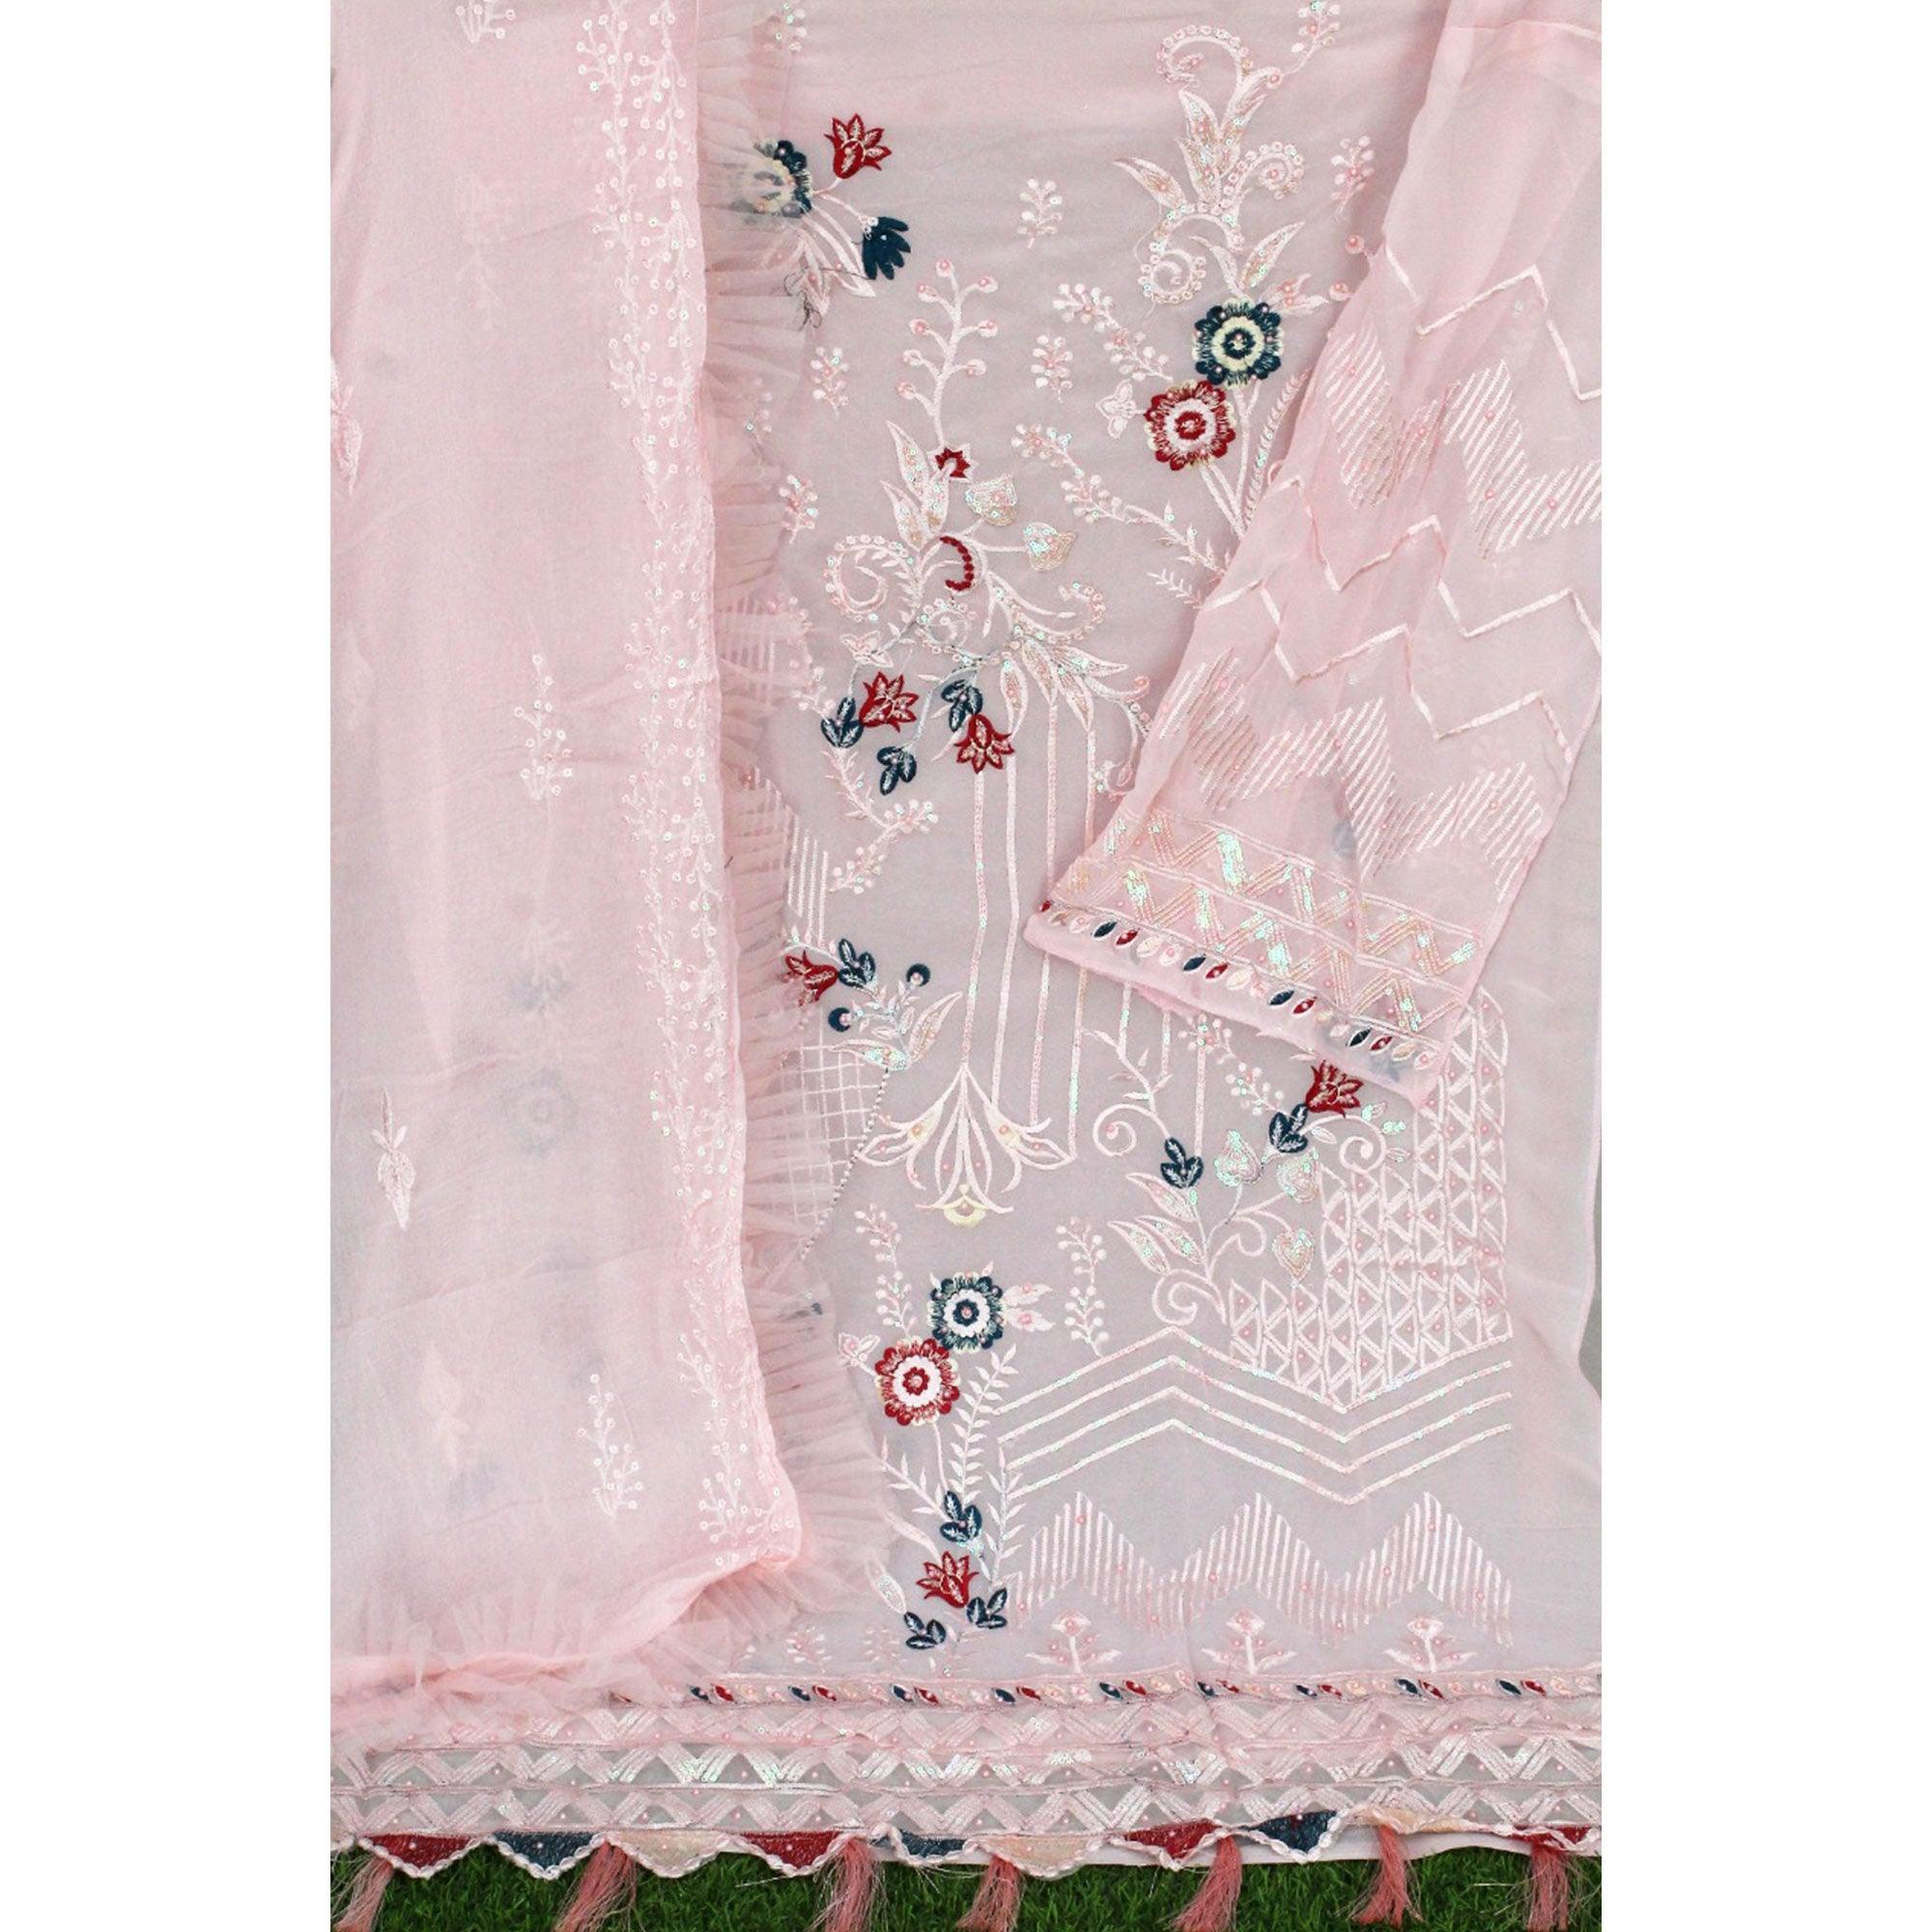 Pink Floral Sequence Embroidered Work Georgette Pakistani Suit - Peachmode